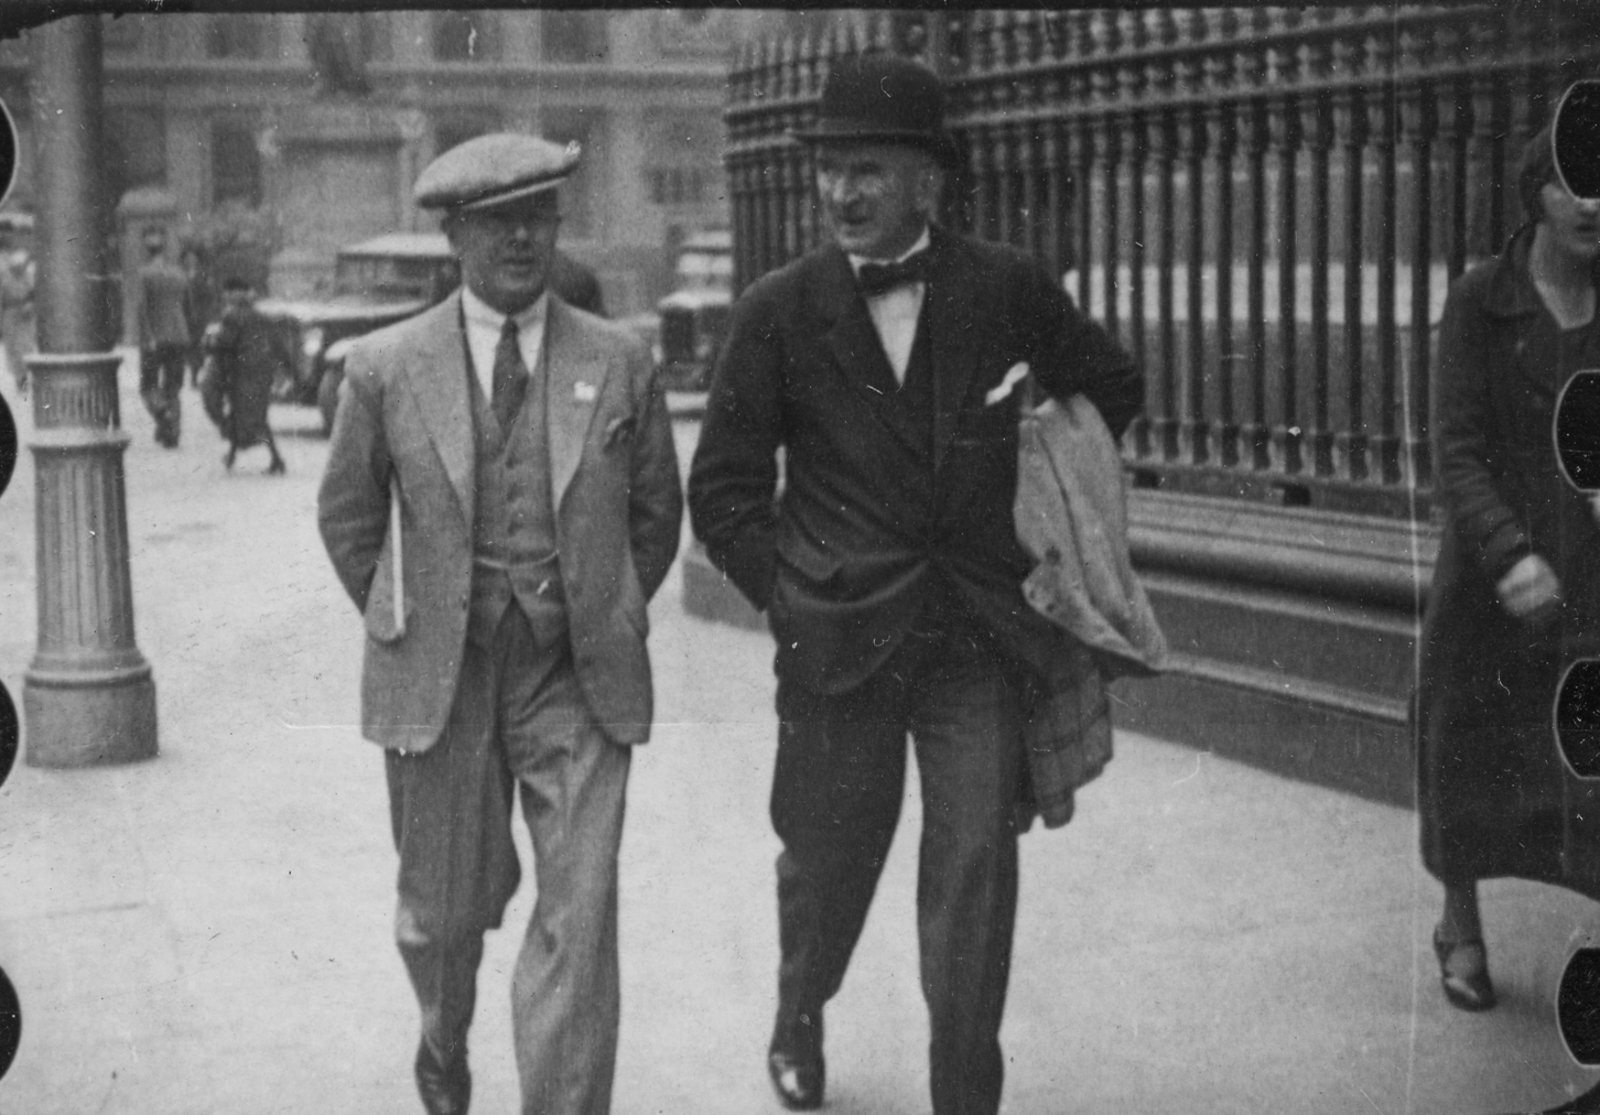 Roy Meerwald Baker (left) pictured with an unknown man, Dublin c. 1920s.